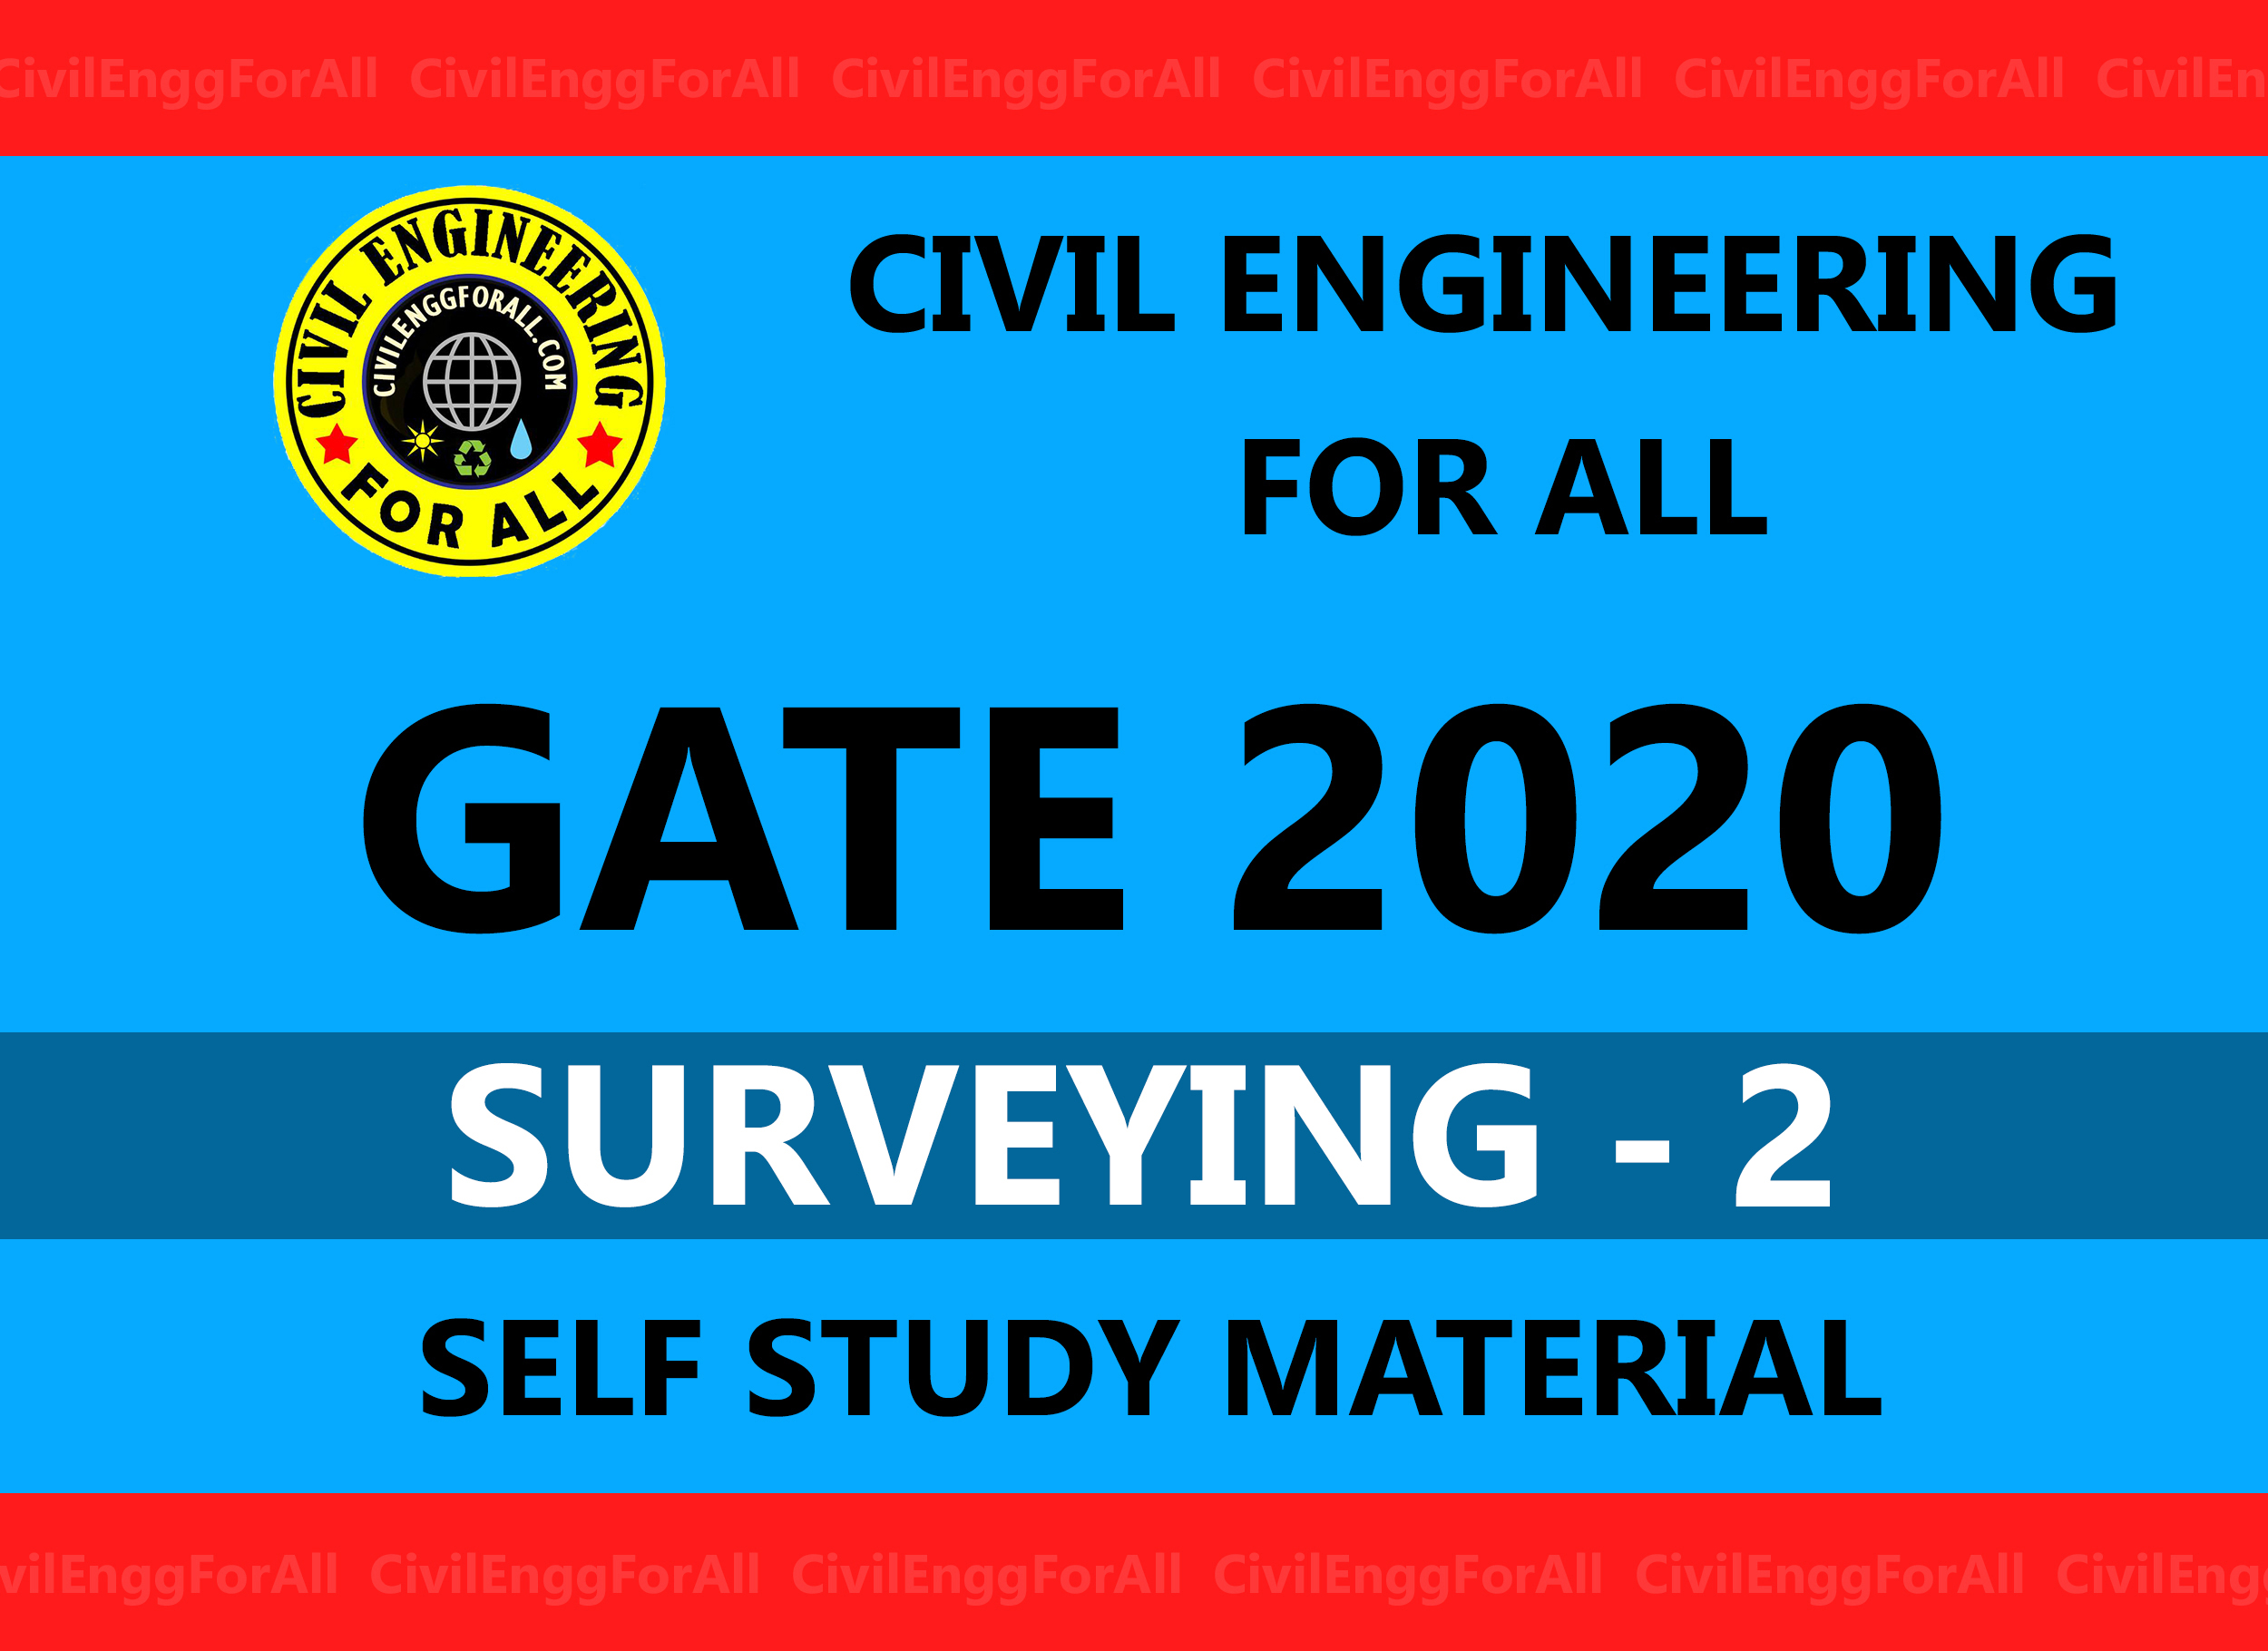 Surveying-2 Civil Engineering GATE 2020 Study Material Free Download PDF - CivilEnggForAll Exclusive